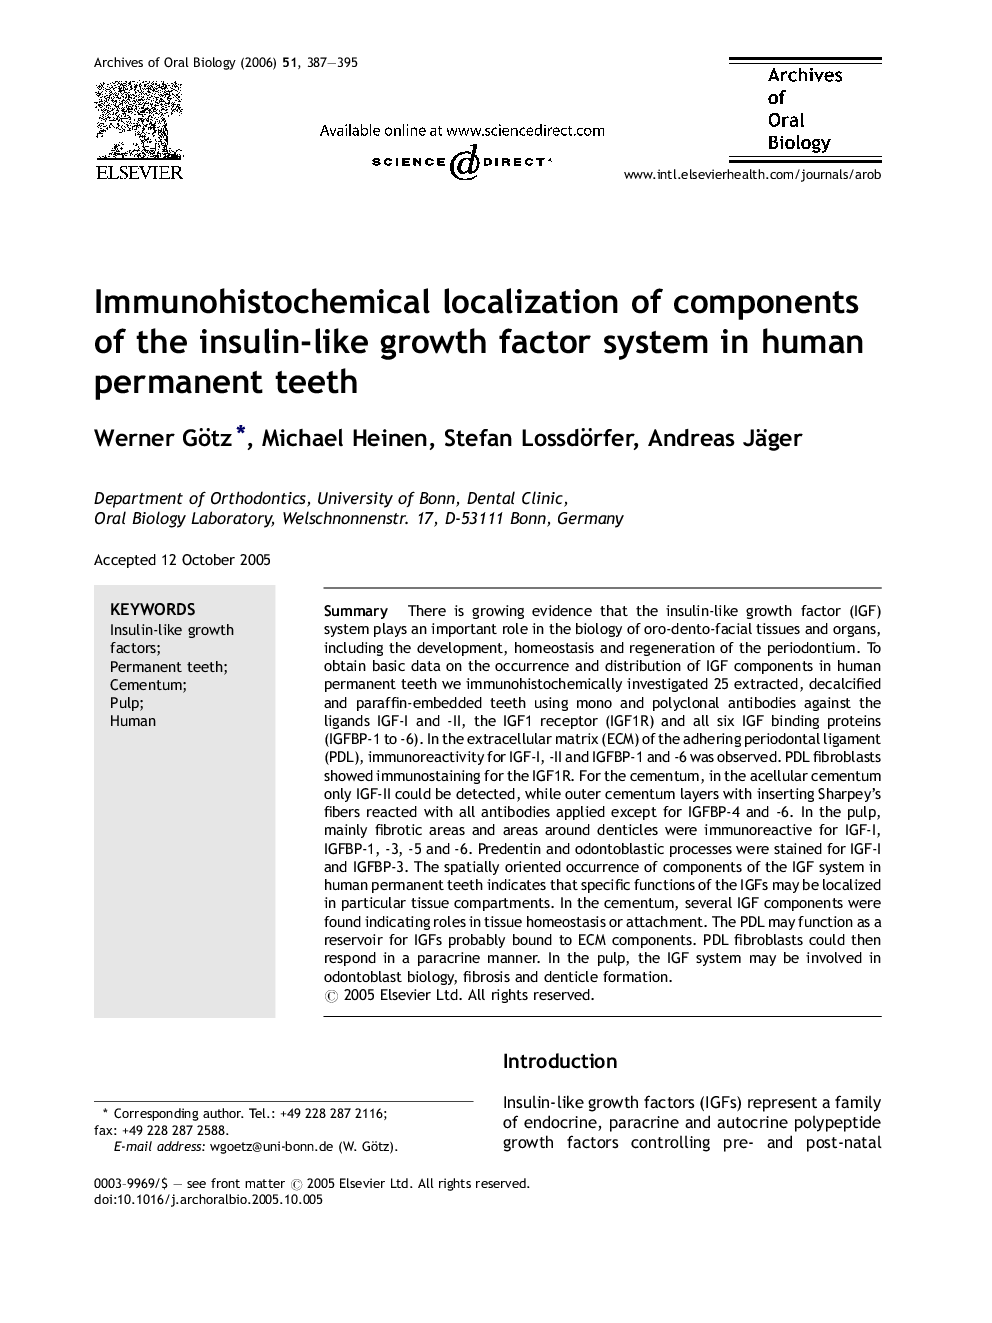 Immunohistochemical localization of components of the insulin-like growth factor system in human permanent teeth